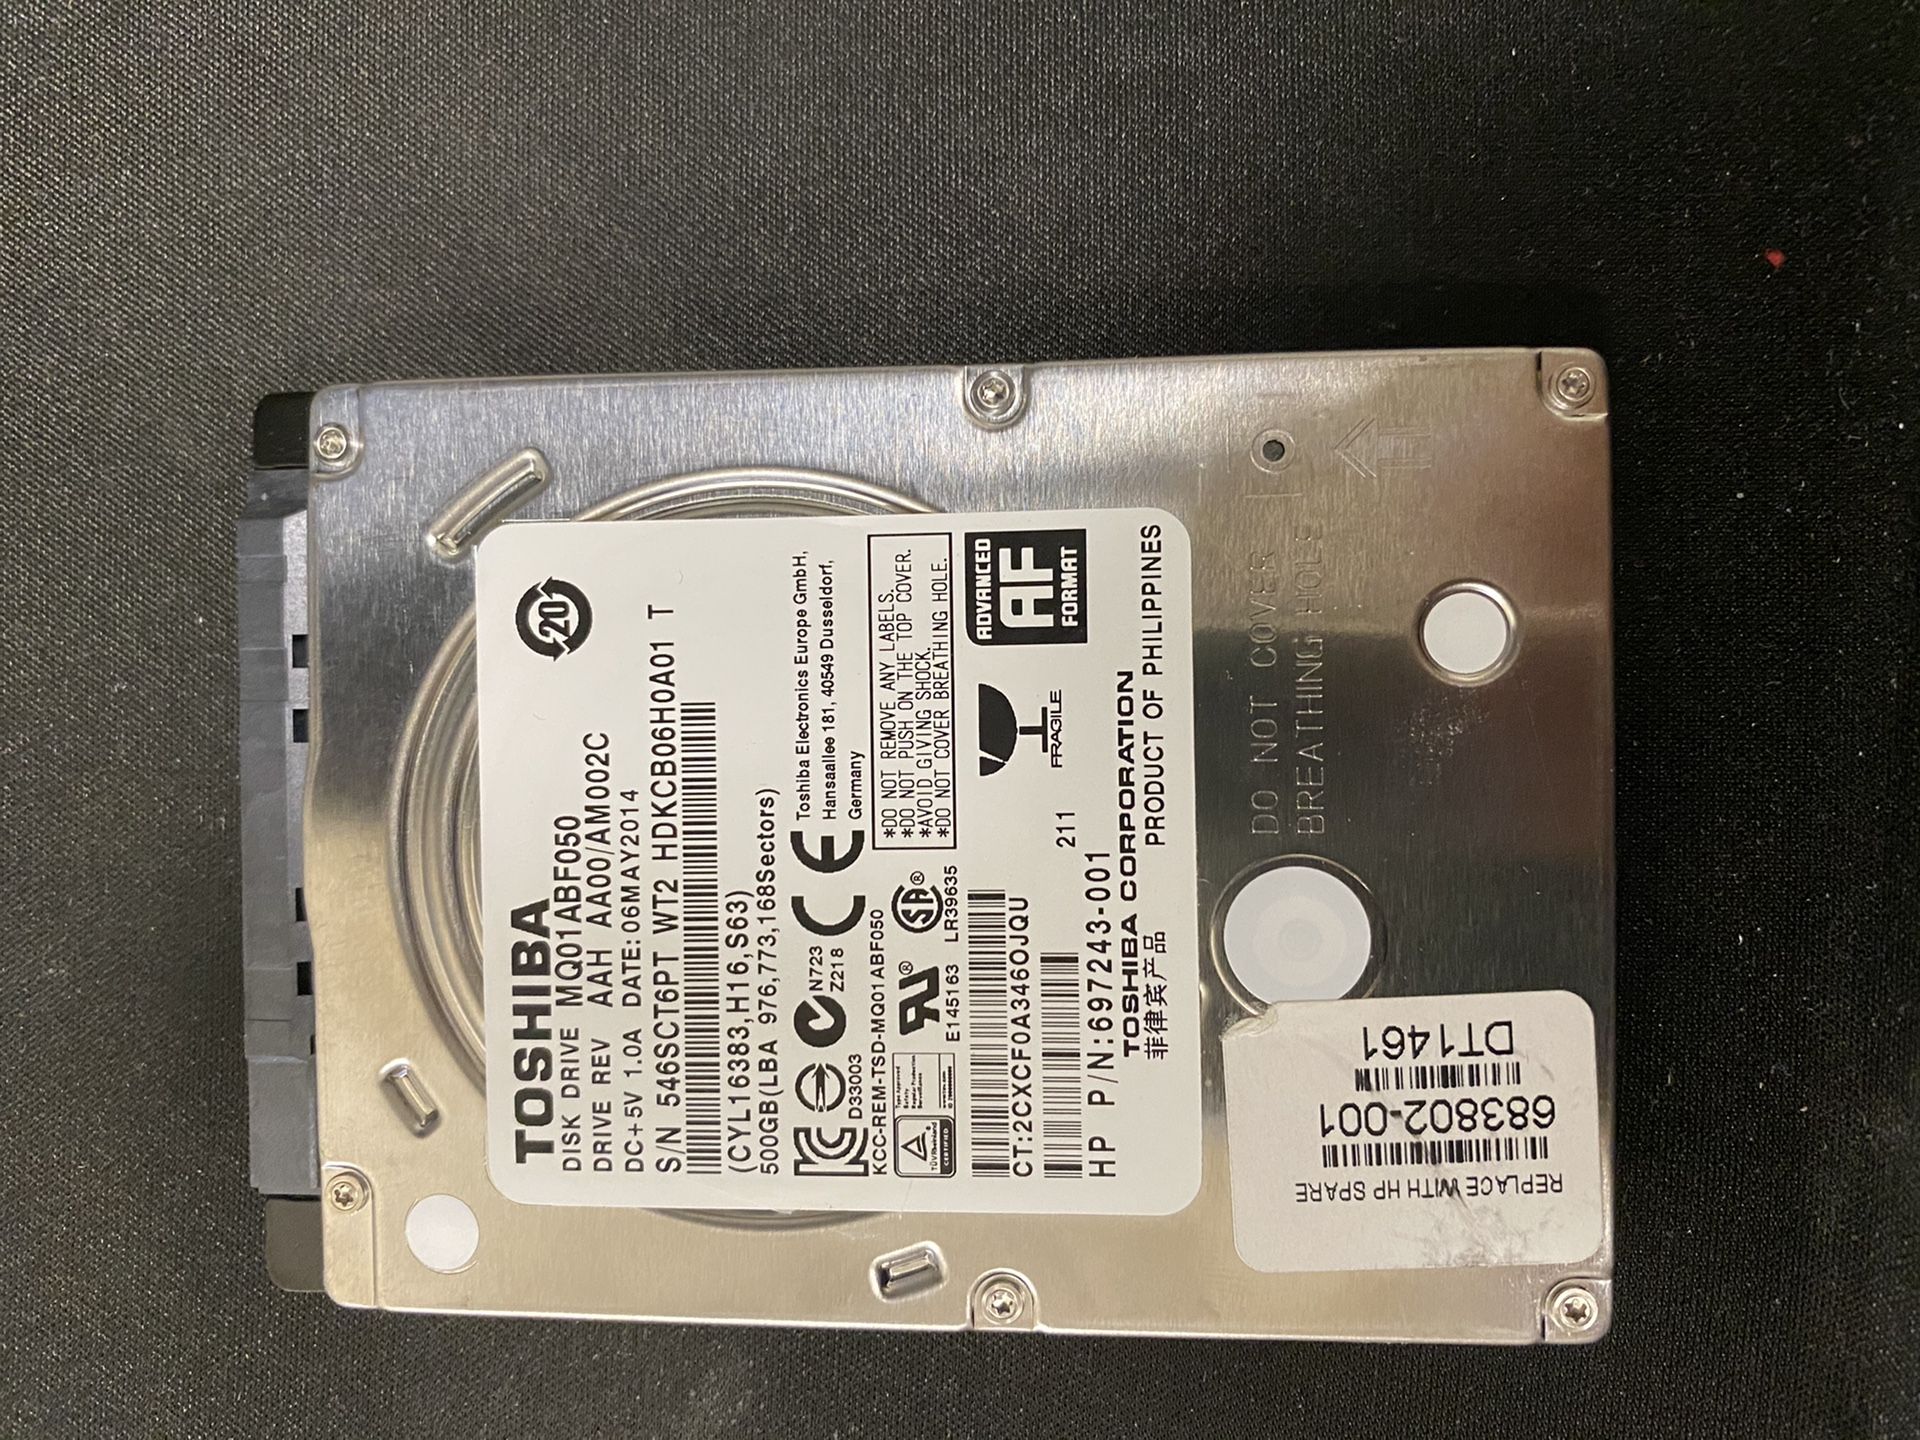 HDD Toshiba 500GB 2.5 for laptop and console